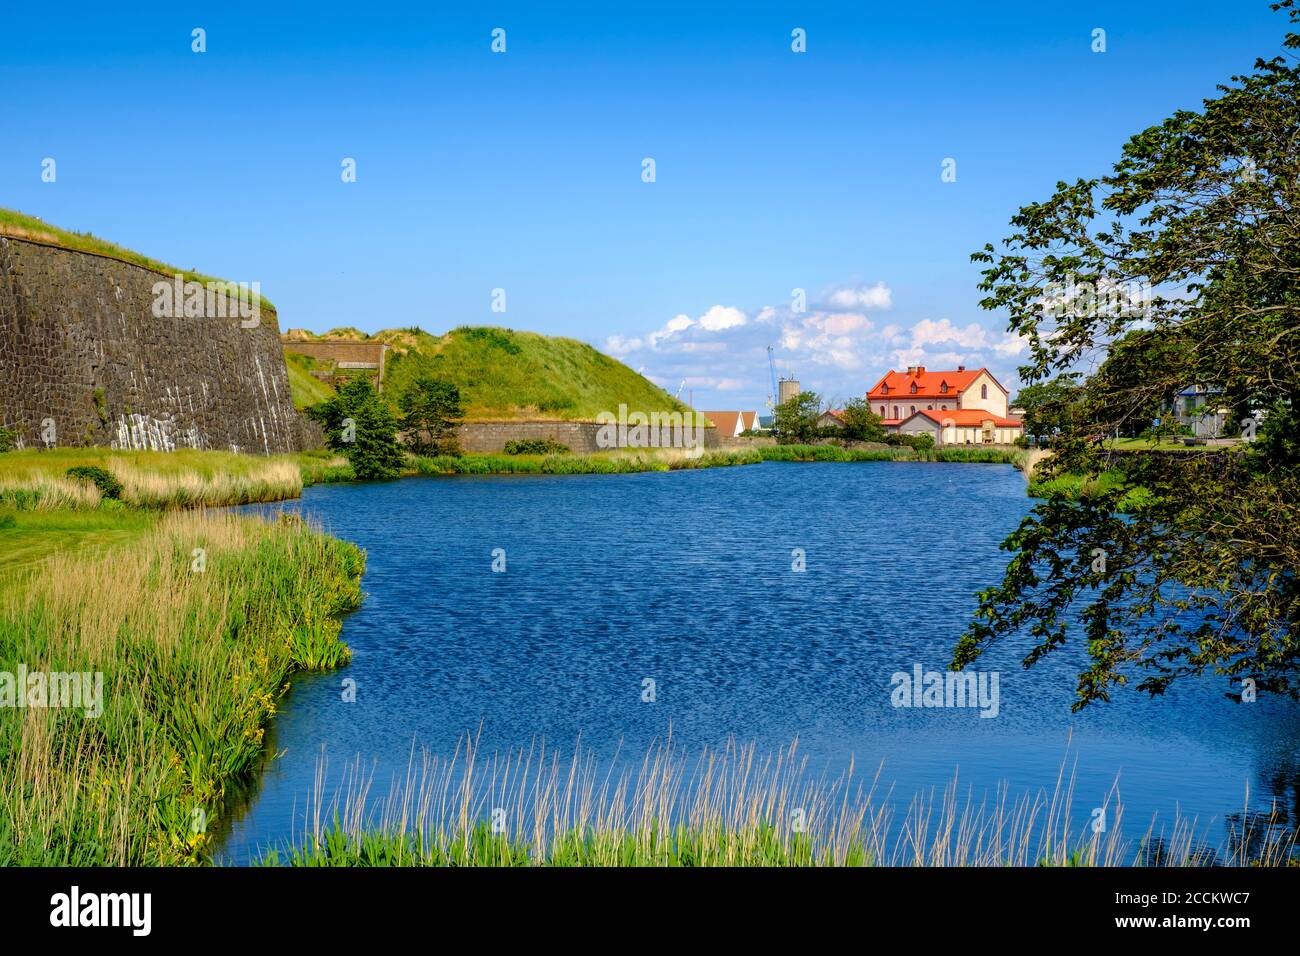 Sweden, Halland County, Varberg, Blue riverbank in summer Stock Photo